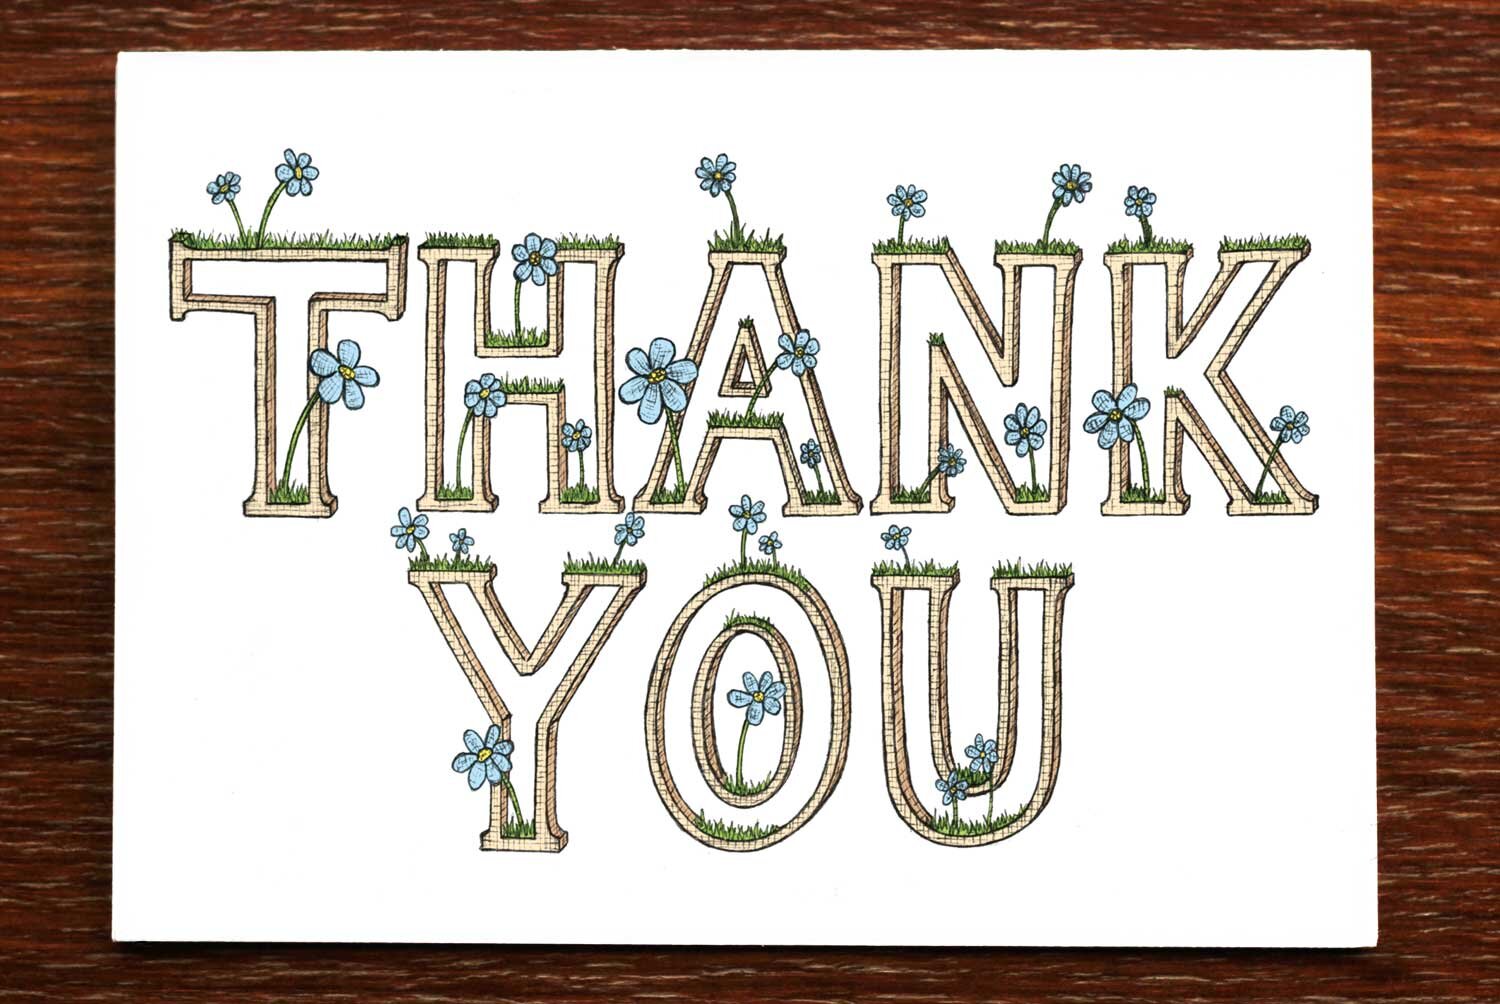 Thank You Daisies - Thank You Greeting Card